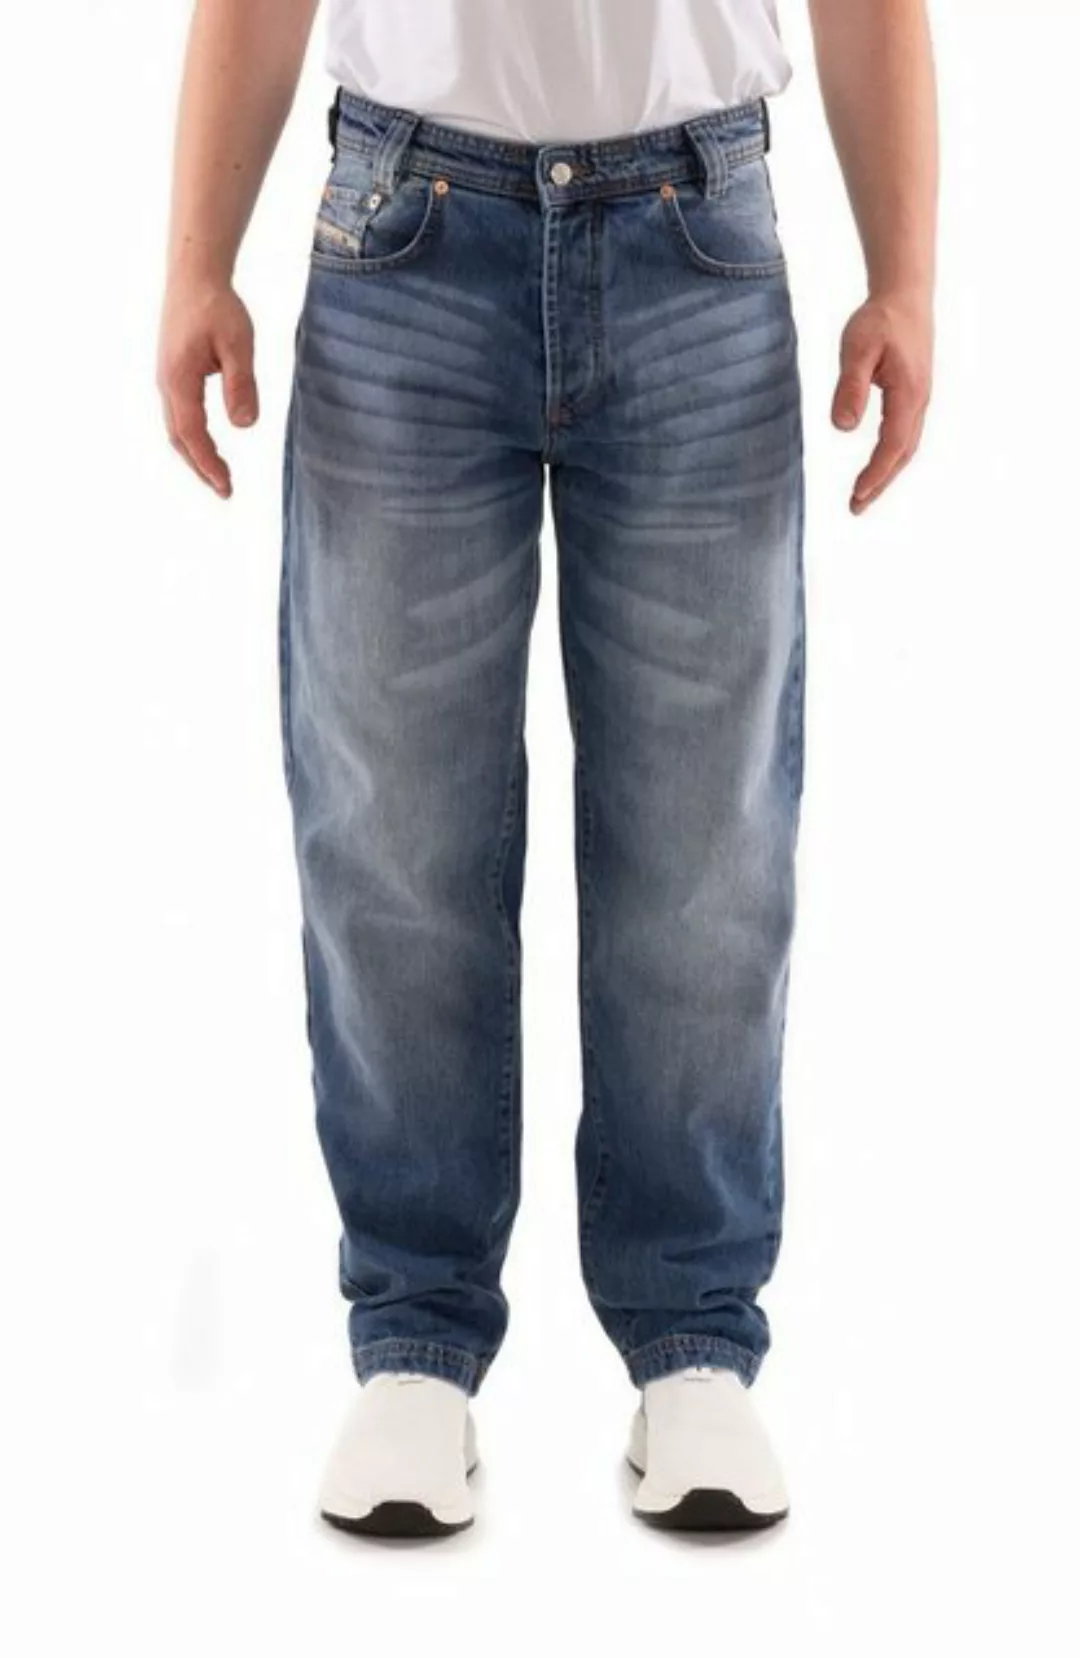 PICALDI Jeans Weite Jeans Zicco 472 Loose Fit, Relaxed Fit günstig online kaufen